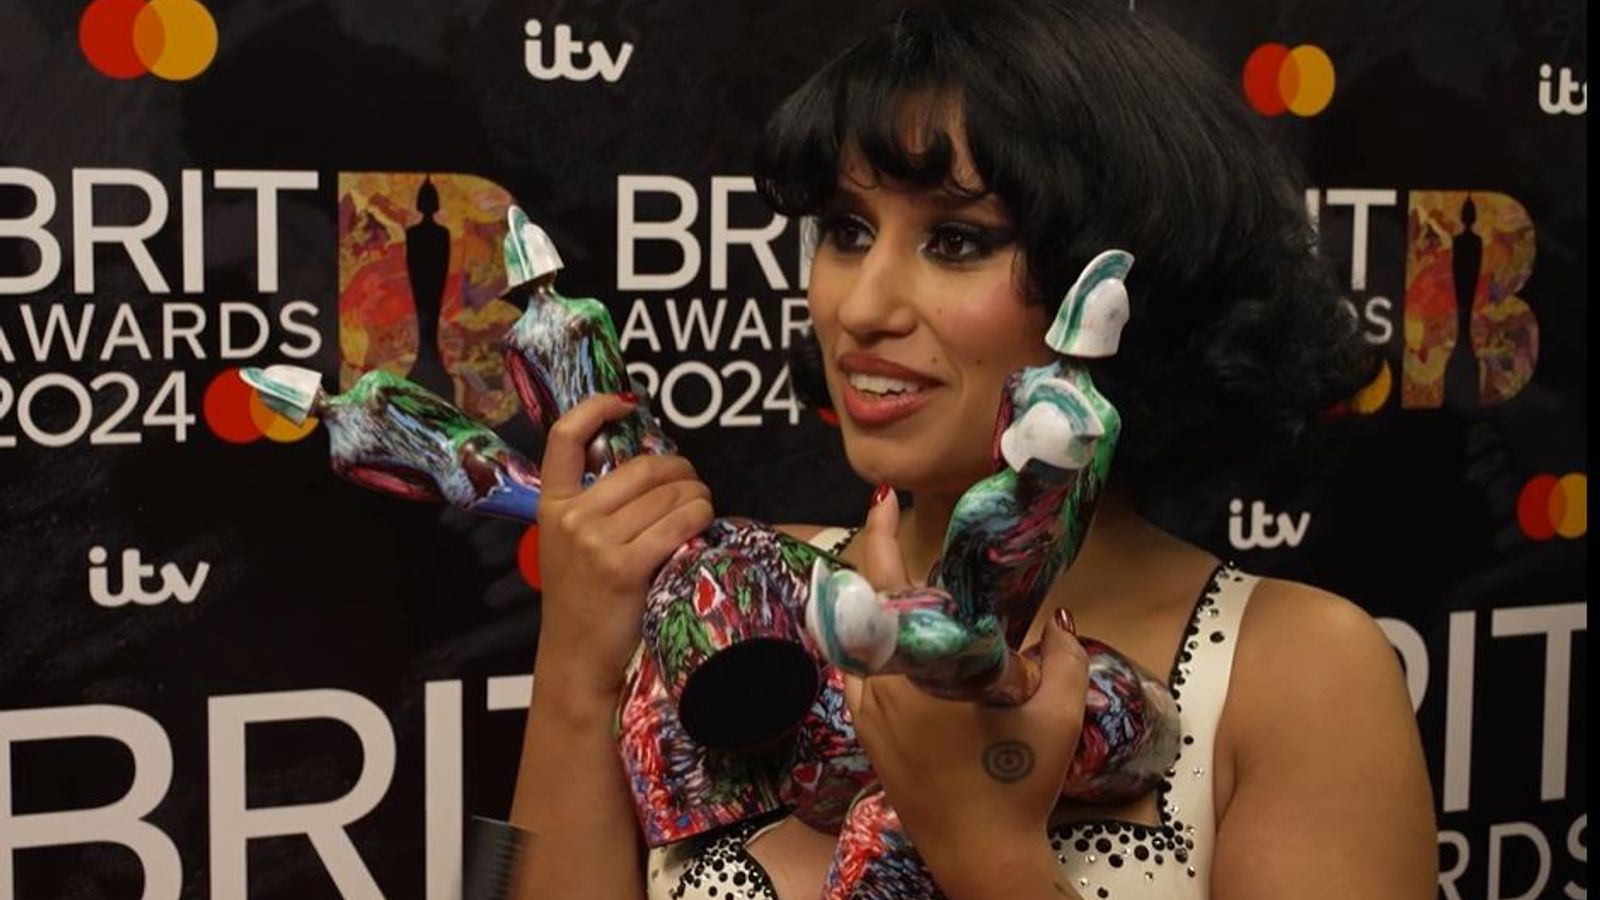 Brit Awards 2024: The rise of Raye, Queen Kylie, and a red carpet giraffe: What everyone's talking about after the Brits